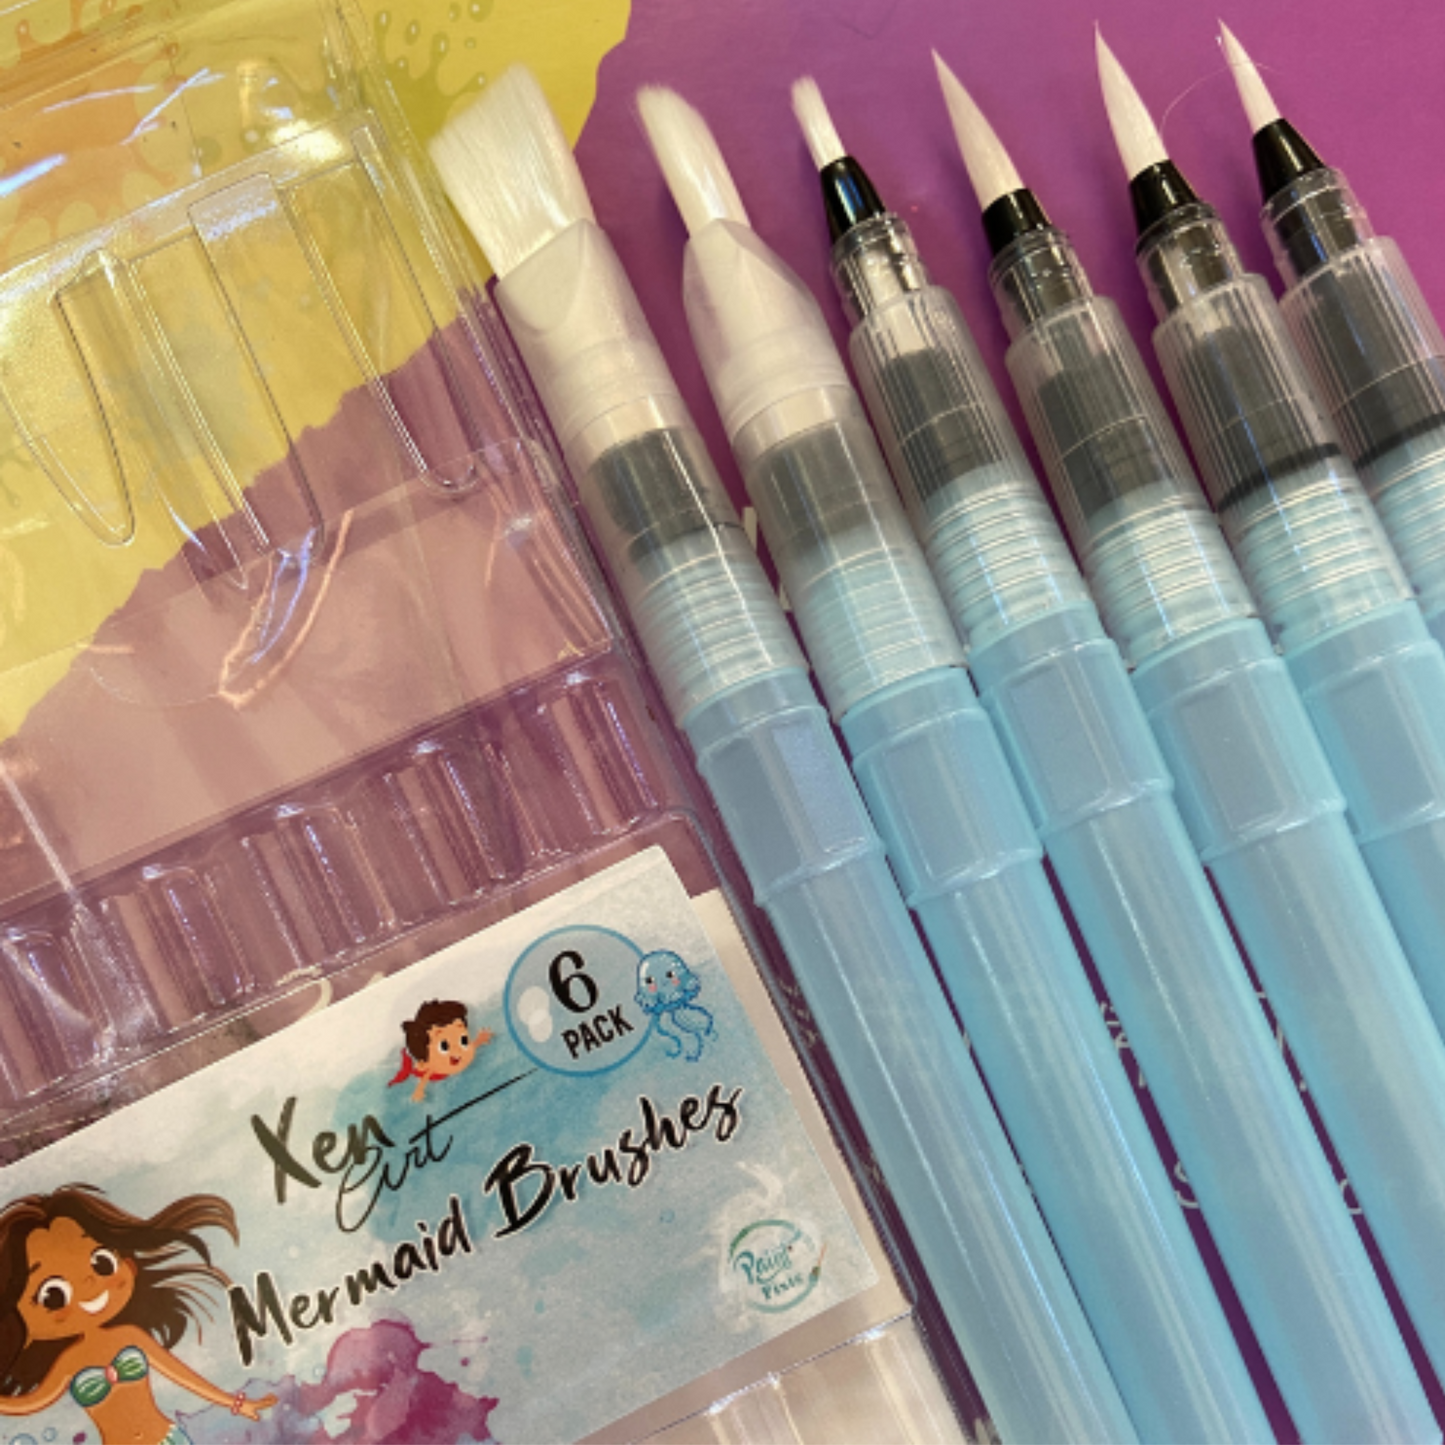 Mermaid Brushes - watercolor brush pen set from Paint Pixie available at Milton's Daughter.